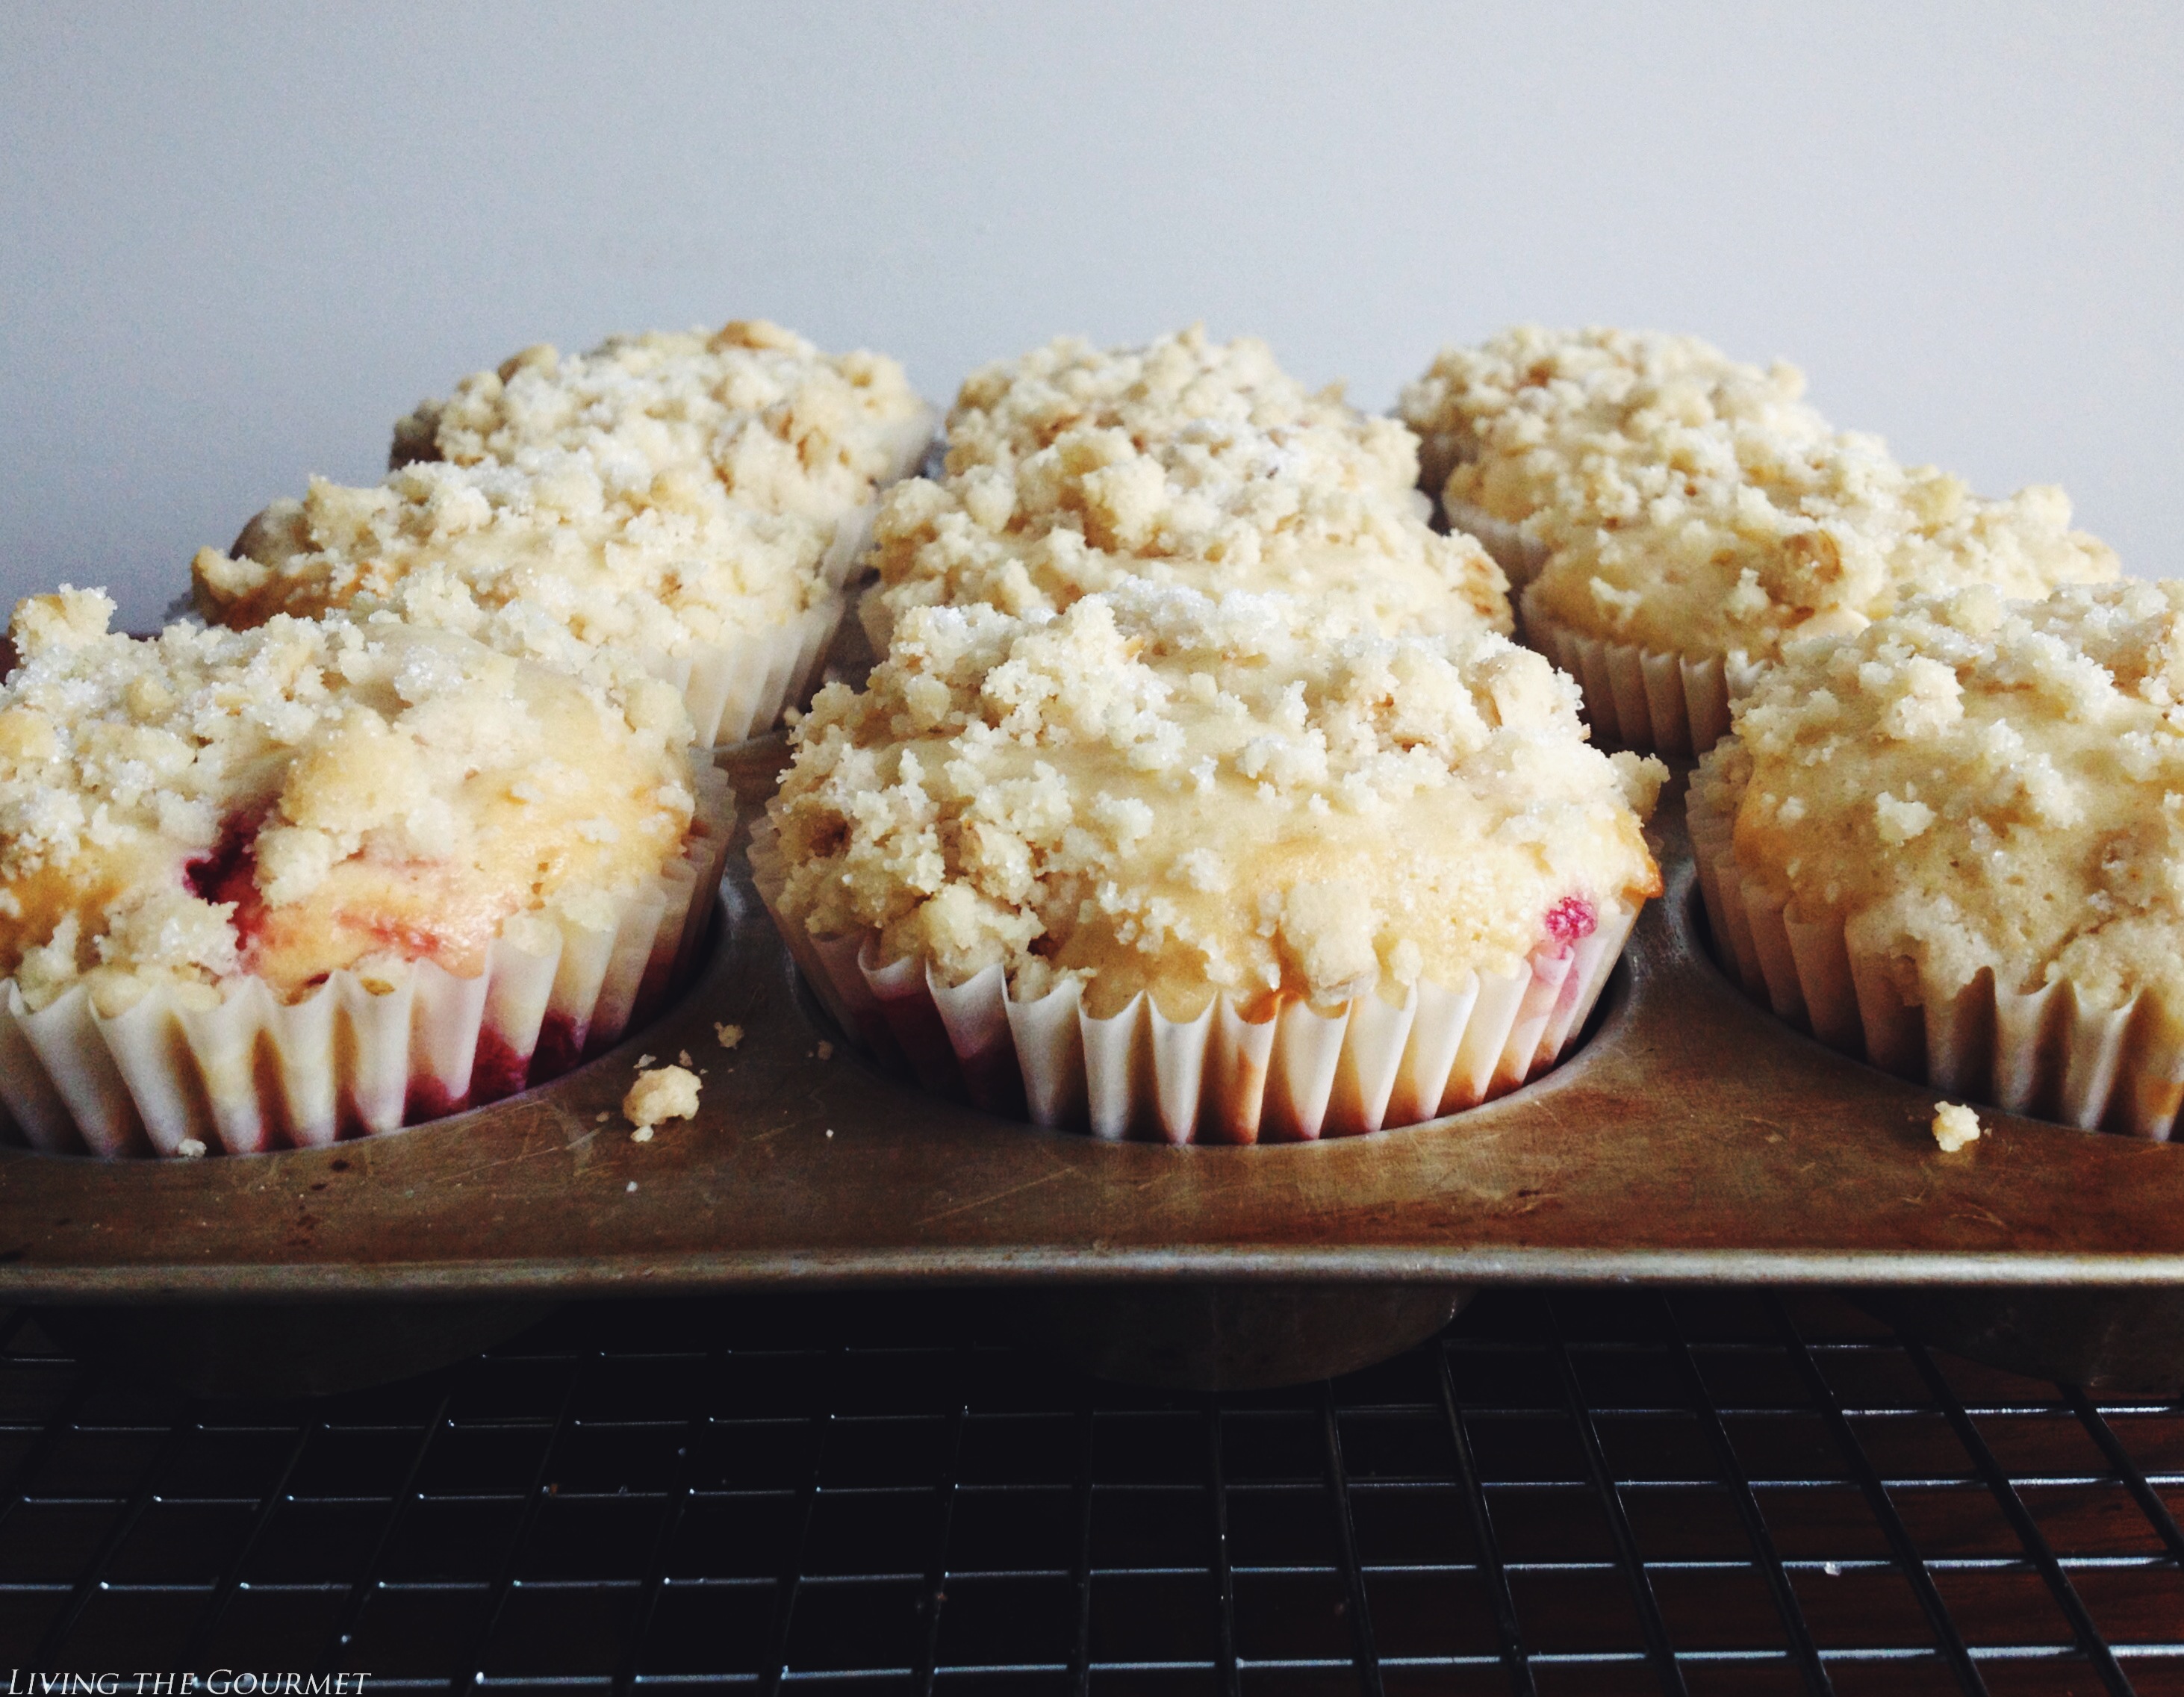 Living the Gourmet: White Chocolate & Strawberry Muffins 